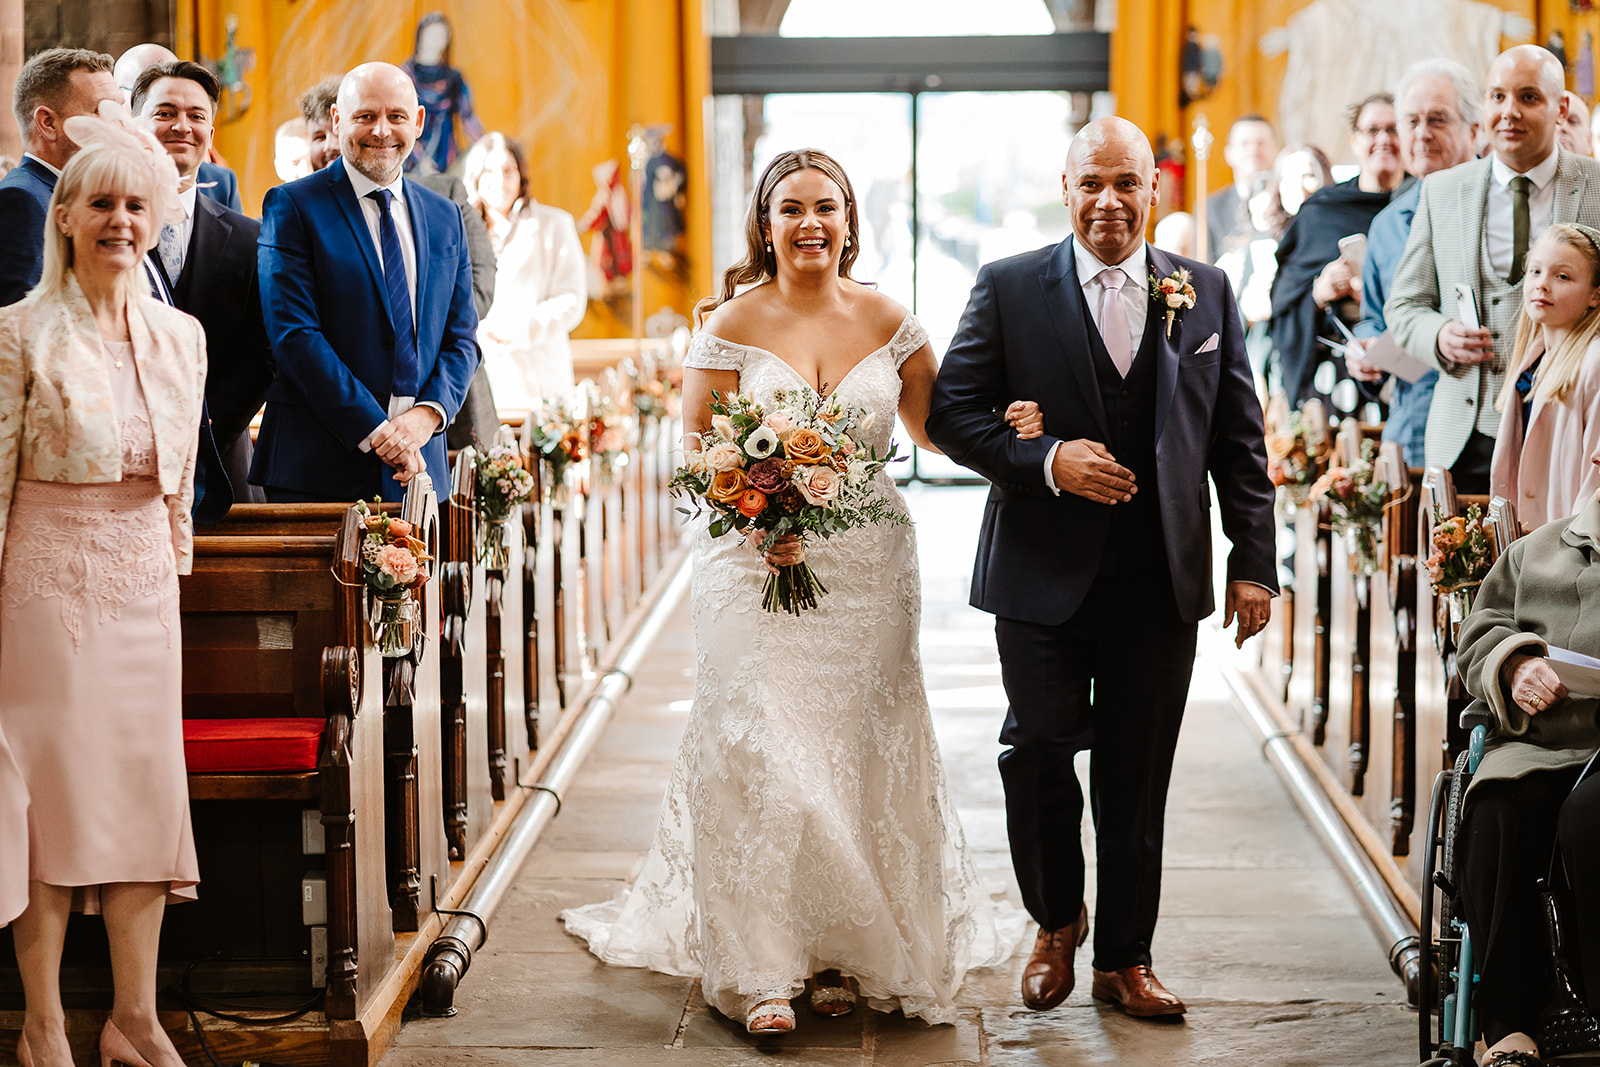 Bride and father walking down aisle in church